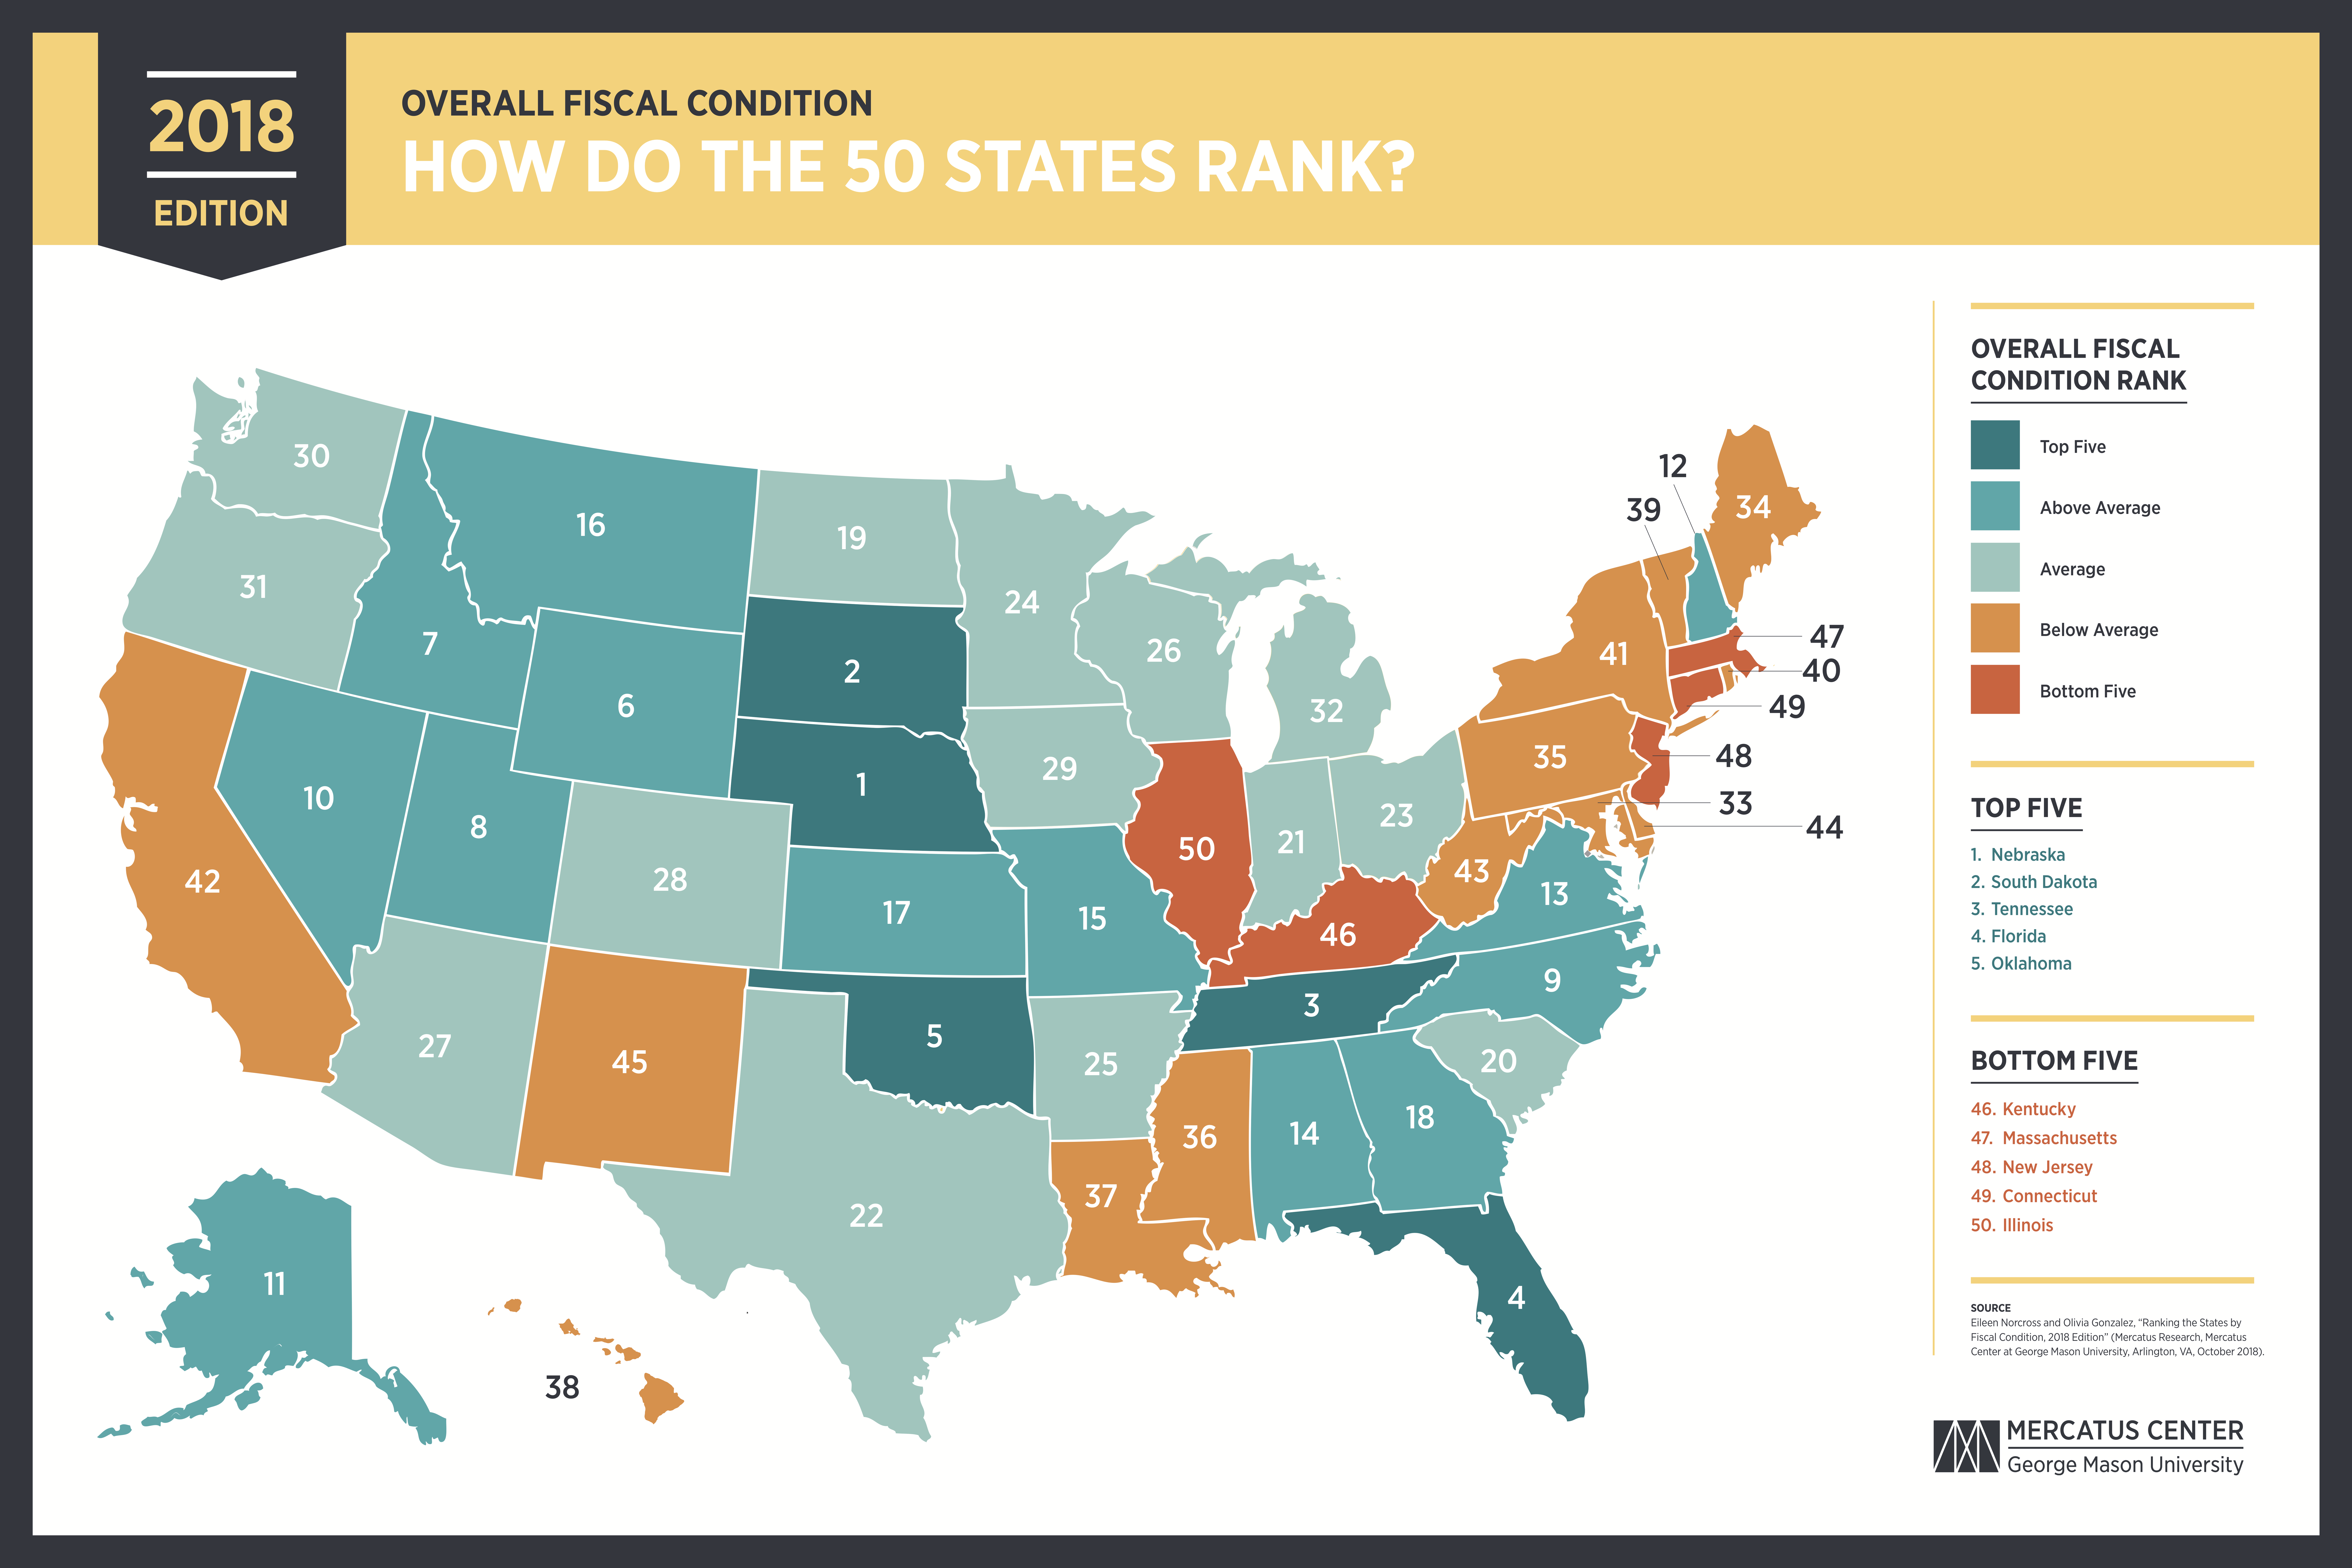 norcross-fiscal-rankings-map-mercatus-v1_copy_0.png